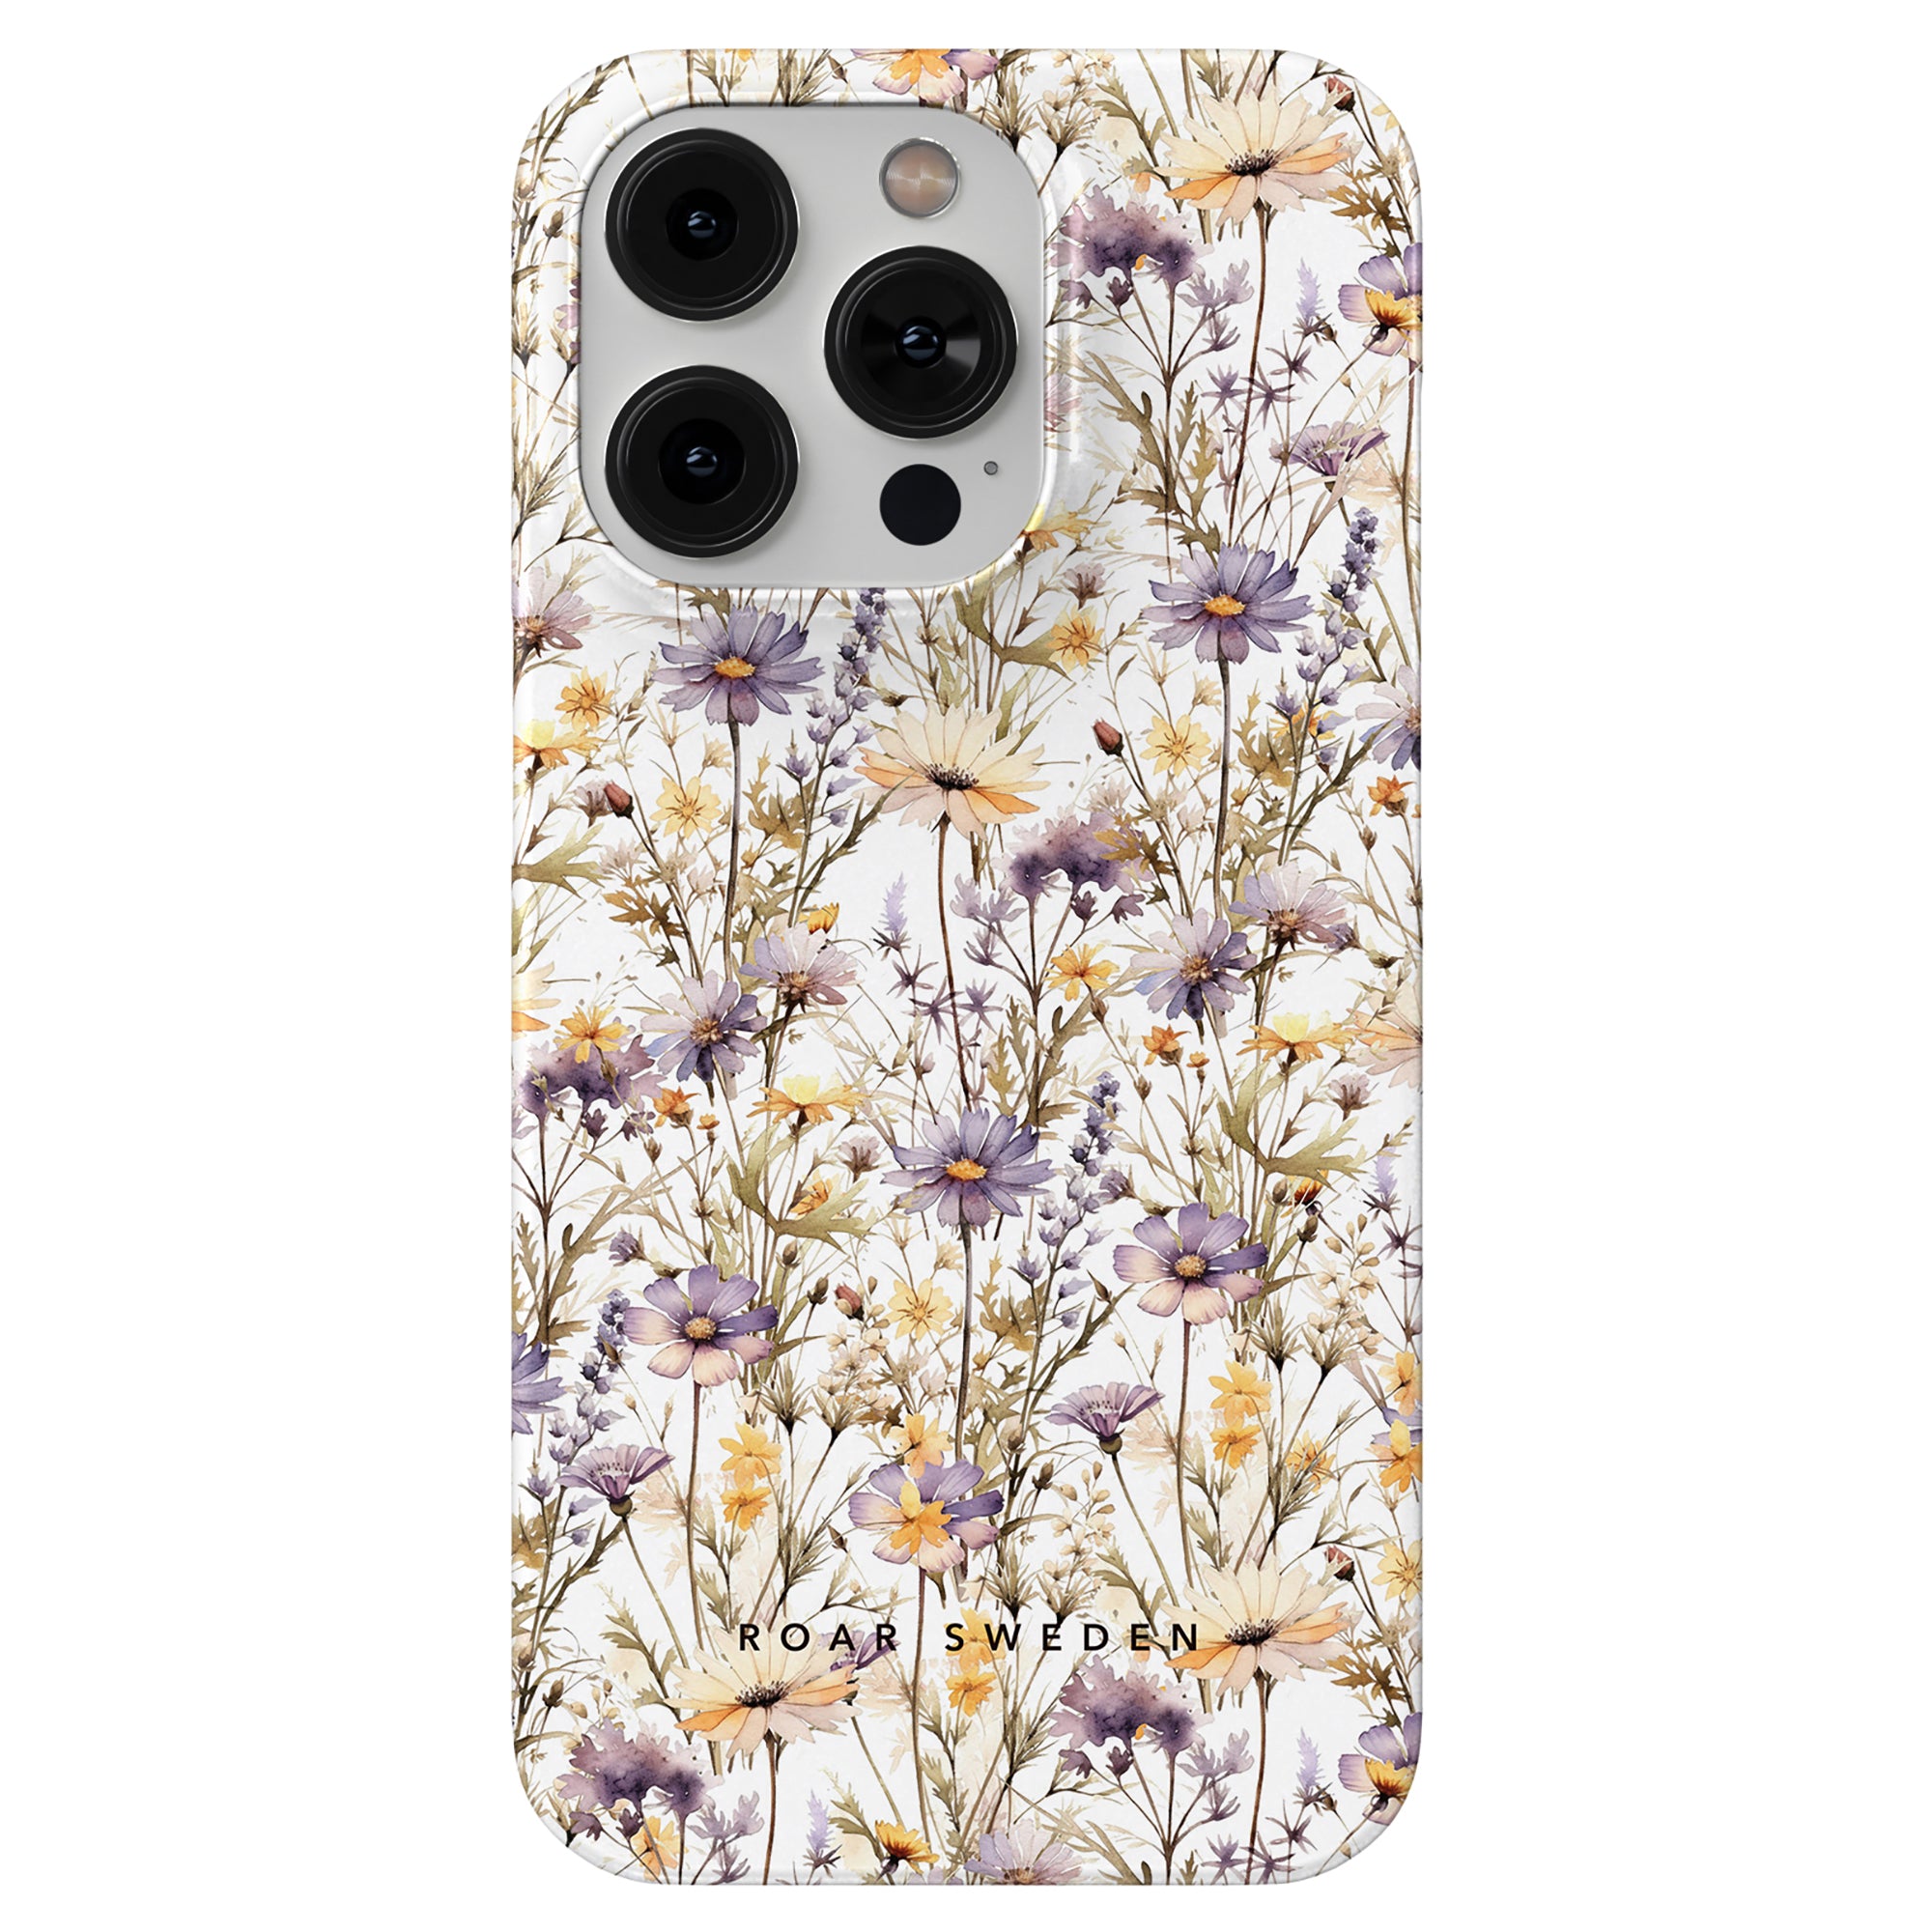 A smartphone with a Purple Wildflower - Slim case displaying various purple, yellow, and white flowers and green stems from the Flower Collection. "Roar Sweden" is printed at the bottom.